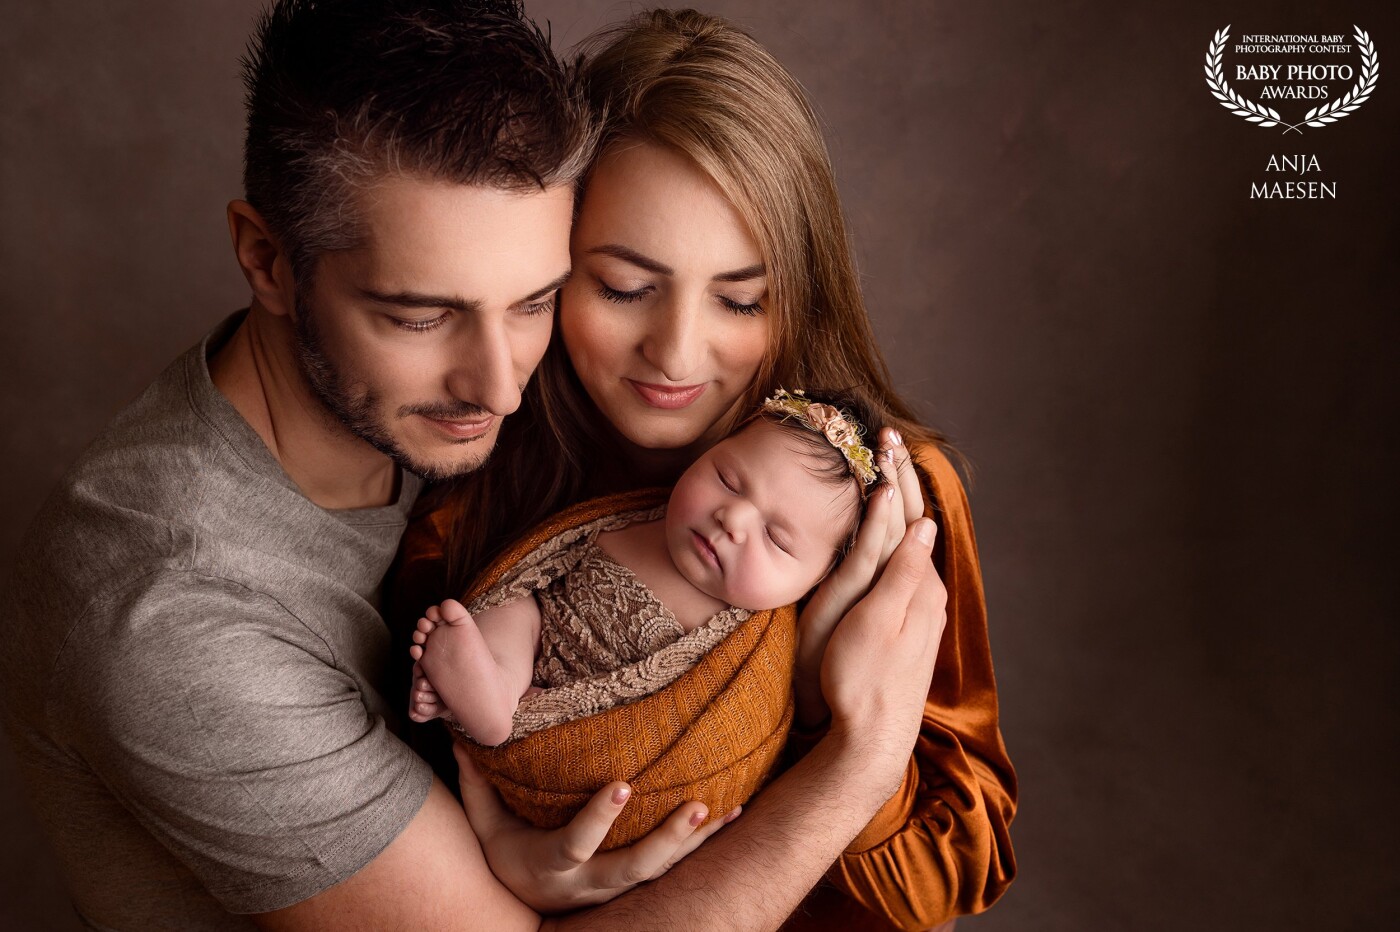 It was a pleasure to photograph this beautiful family with their amazing daughter.<br />
Parents pictures used to scare me, but they are now as important as the baby pictures itself.